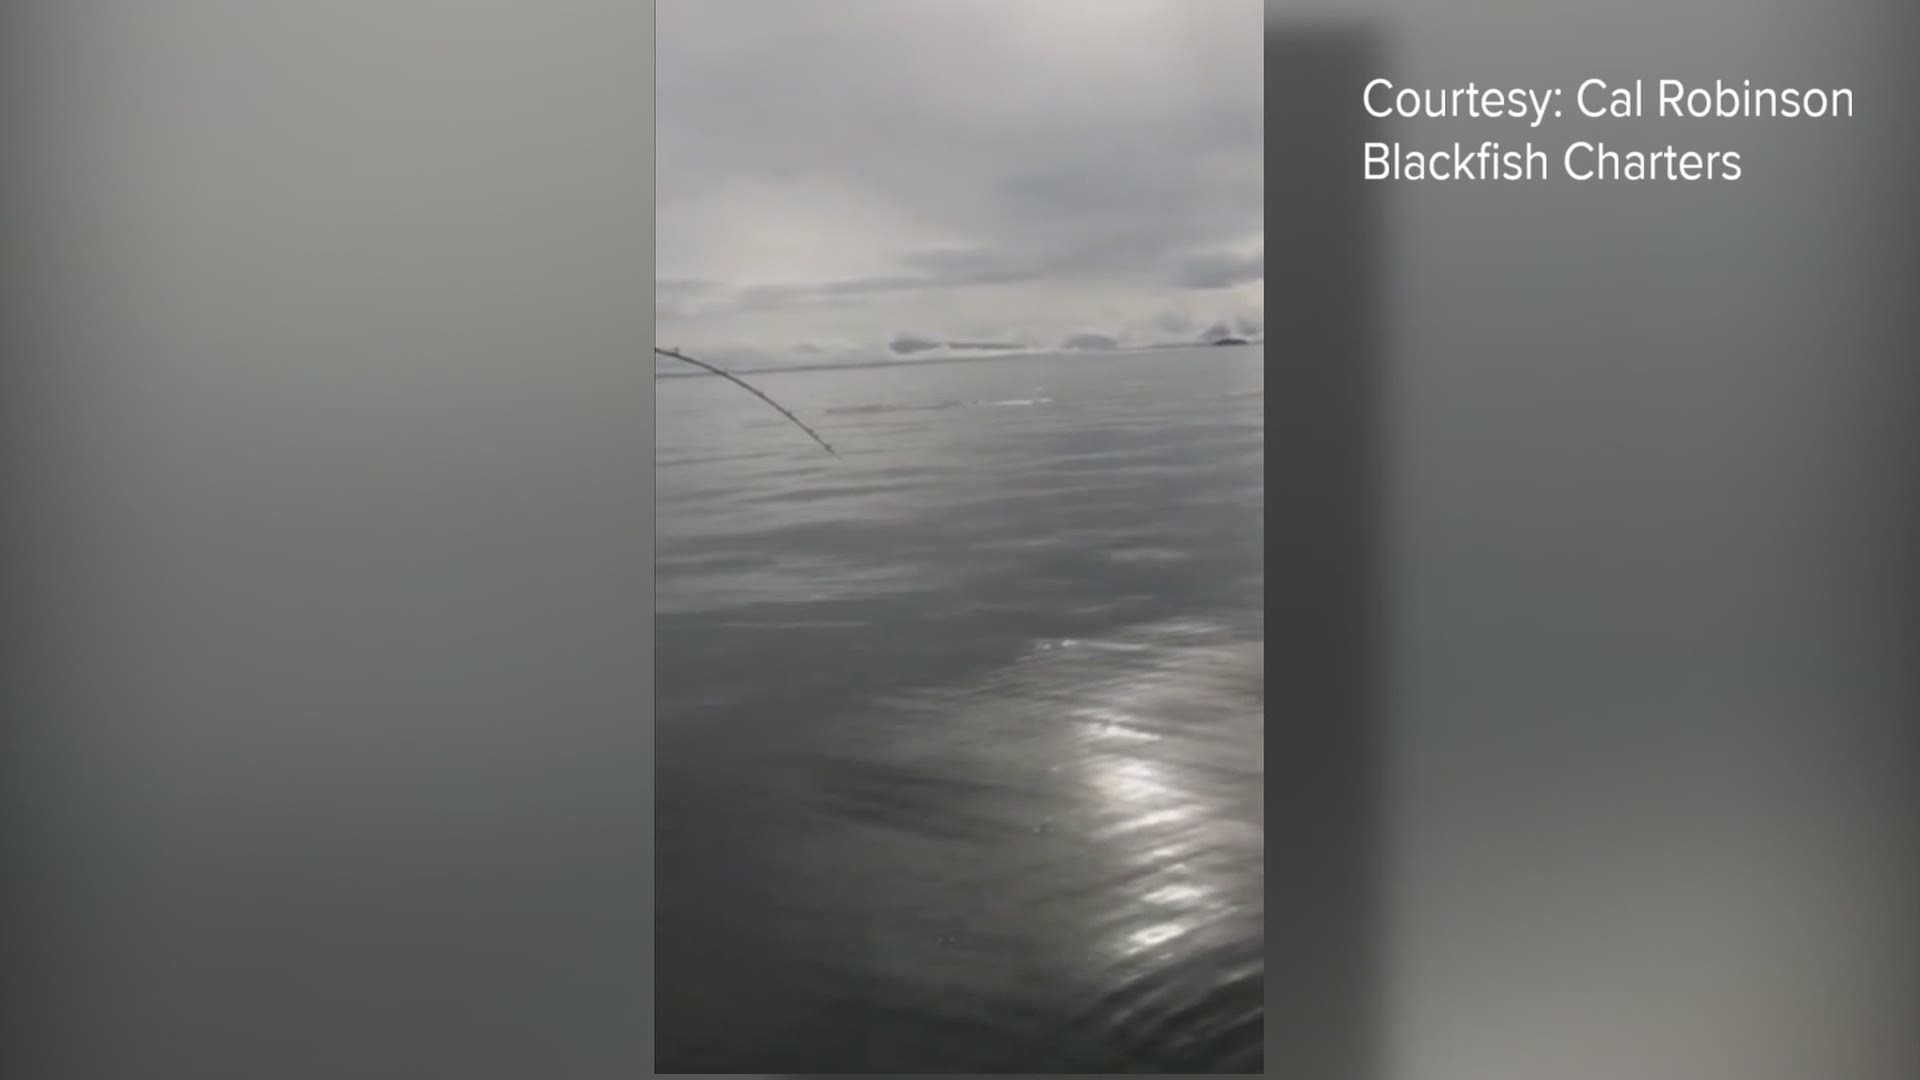 A tricky orca made off with a fisherman’s salmon near Prince Rupert in British Columbia on Monday.